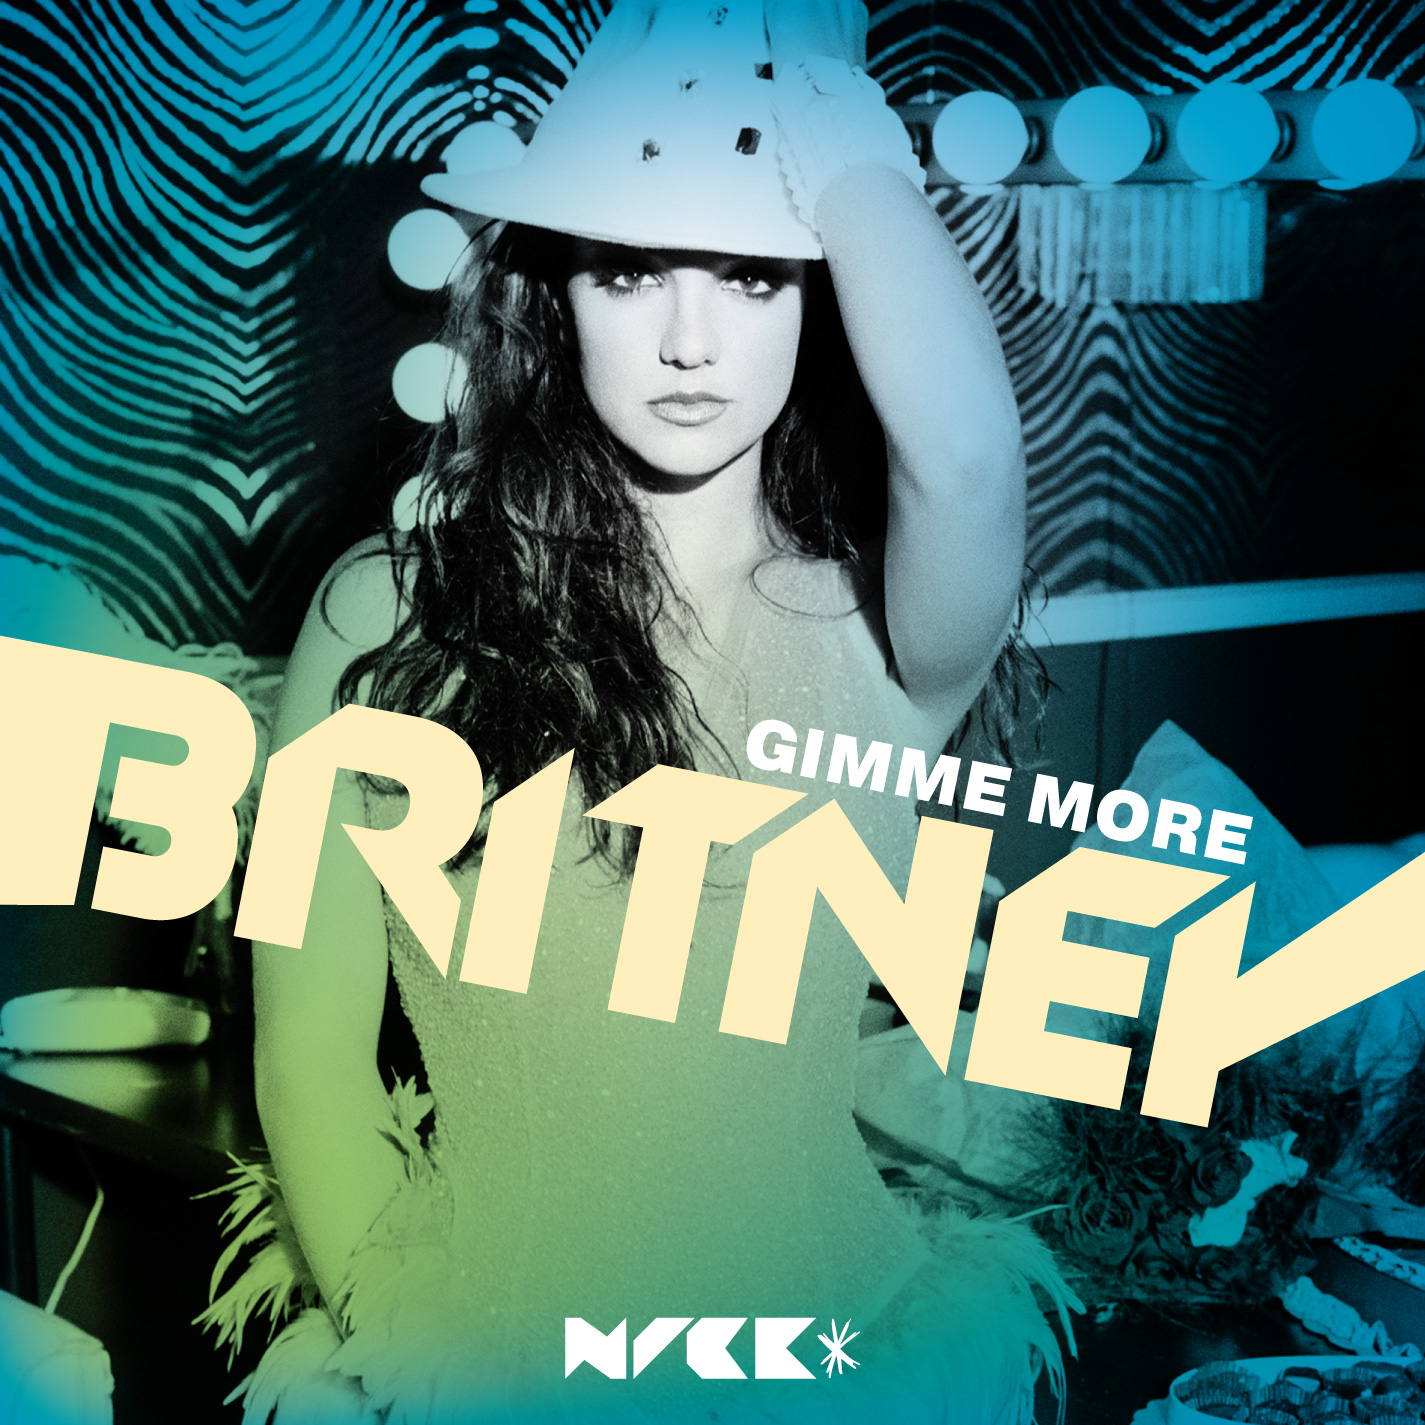 Britney Spears - Gimme More Nick* Chicago & 64 Bit Remixes